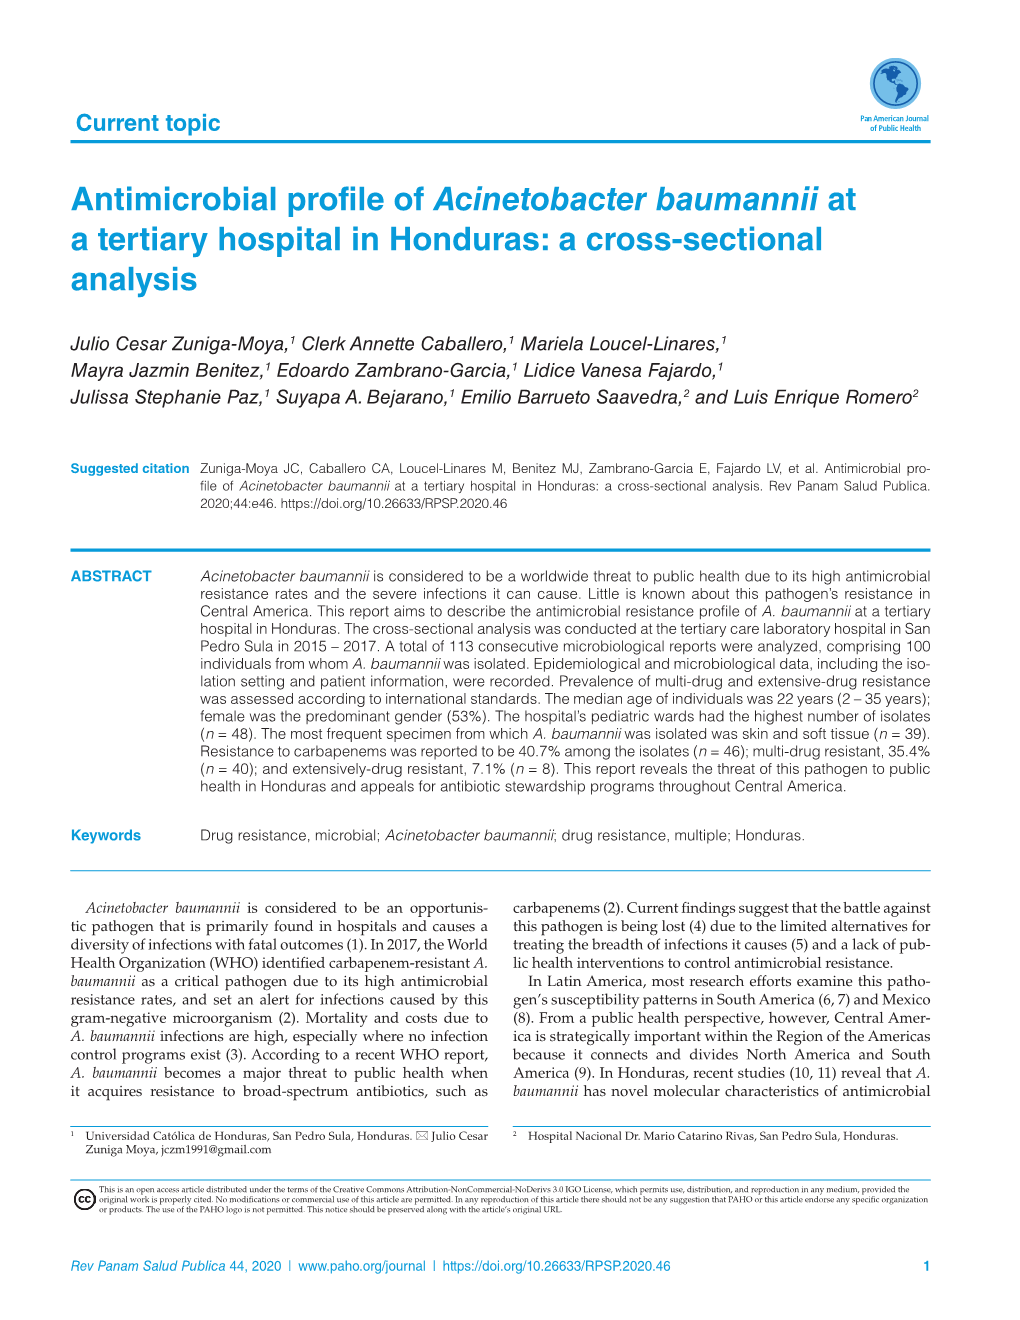 Antimicrobial Profile of Acinetobacter Baumannii at a Tertiary Hospital In